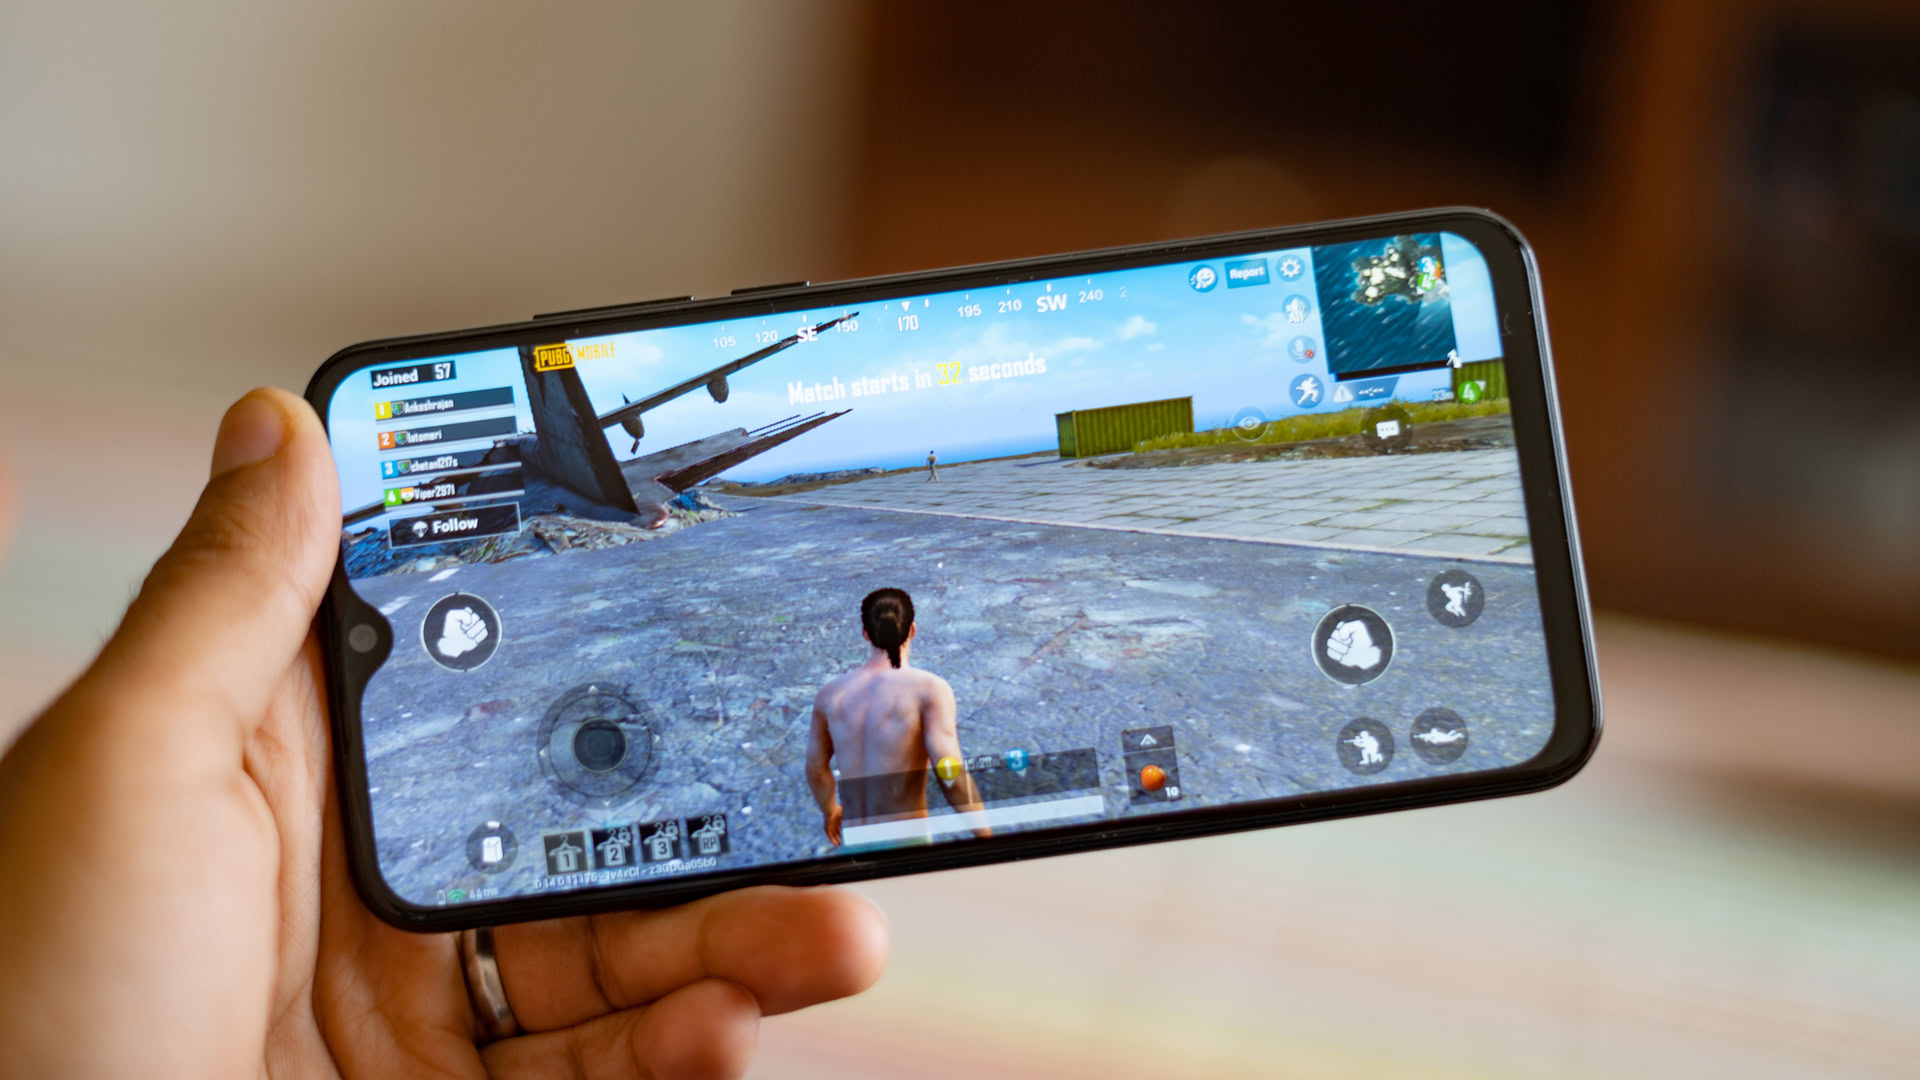 Smartphones are the most favoured devices to play PUBG in India: Study